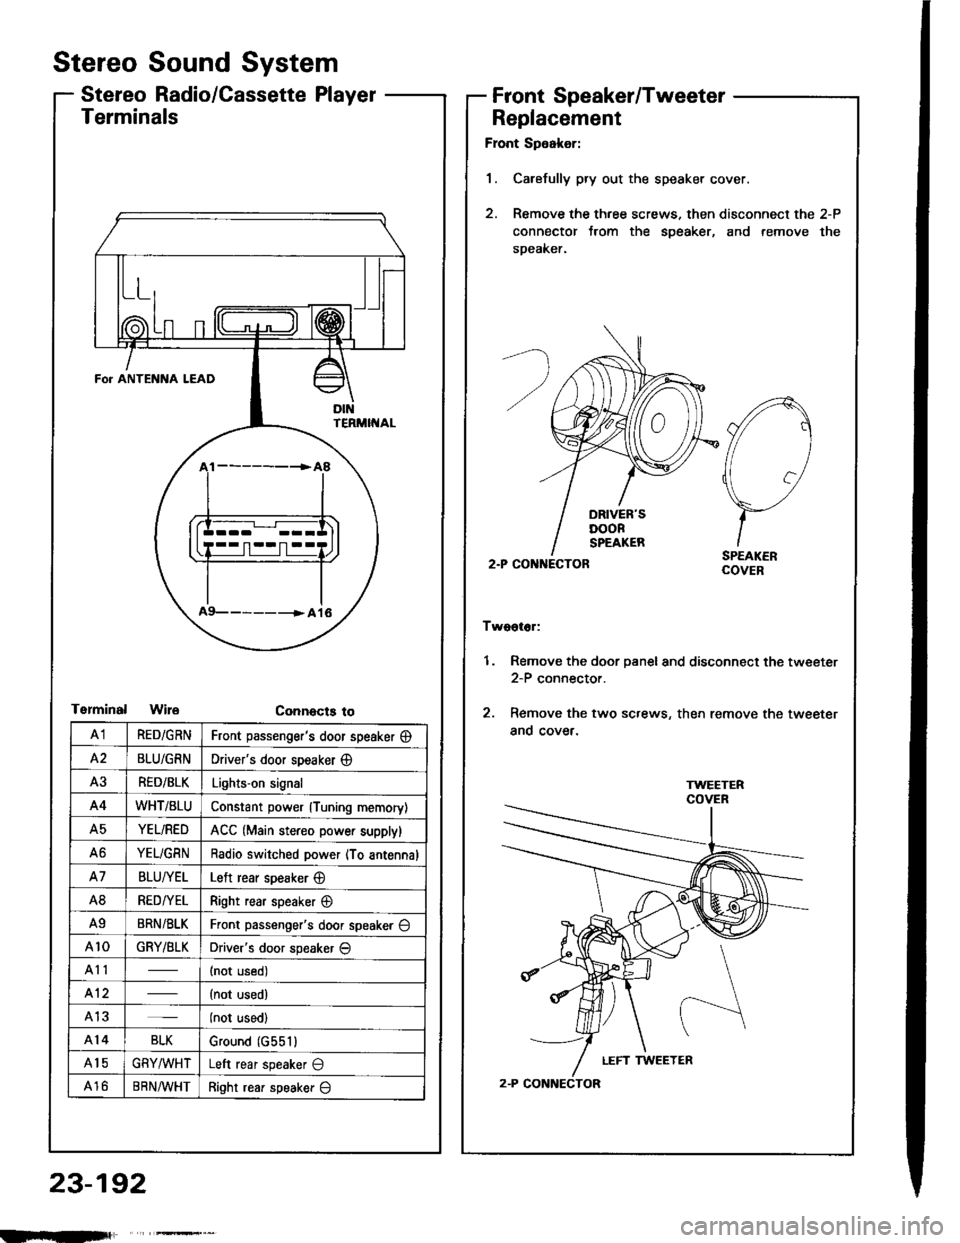 HONDA INTEGRA 1994 4.G Workshop Manual Terminals
Connects to
\
*i,.,-terlll
FO] ANTENNA LEADA
TI!NM[IAL
A9---------+A16
Stereo Sound System
Stereo Radio/Cassette PlayerFront Speaker/Tweeter
Replacement
Front Spoakor:
1. Carefully pry out t